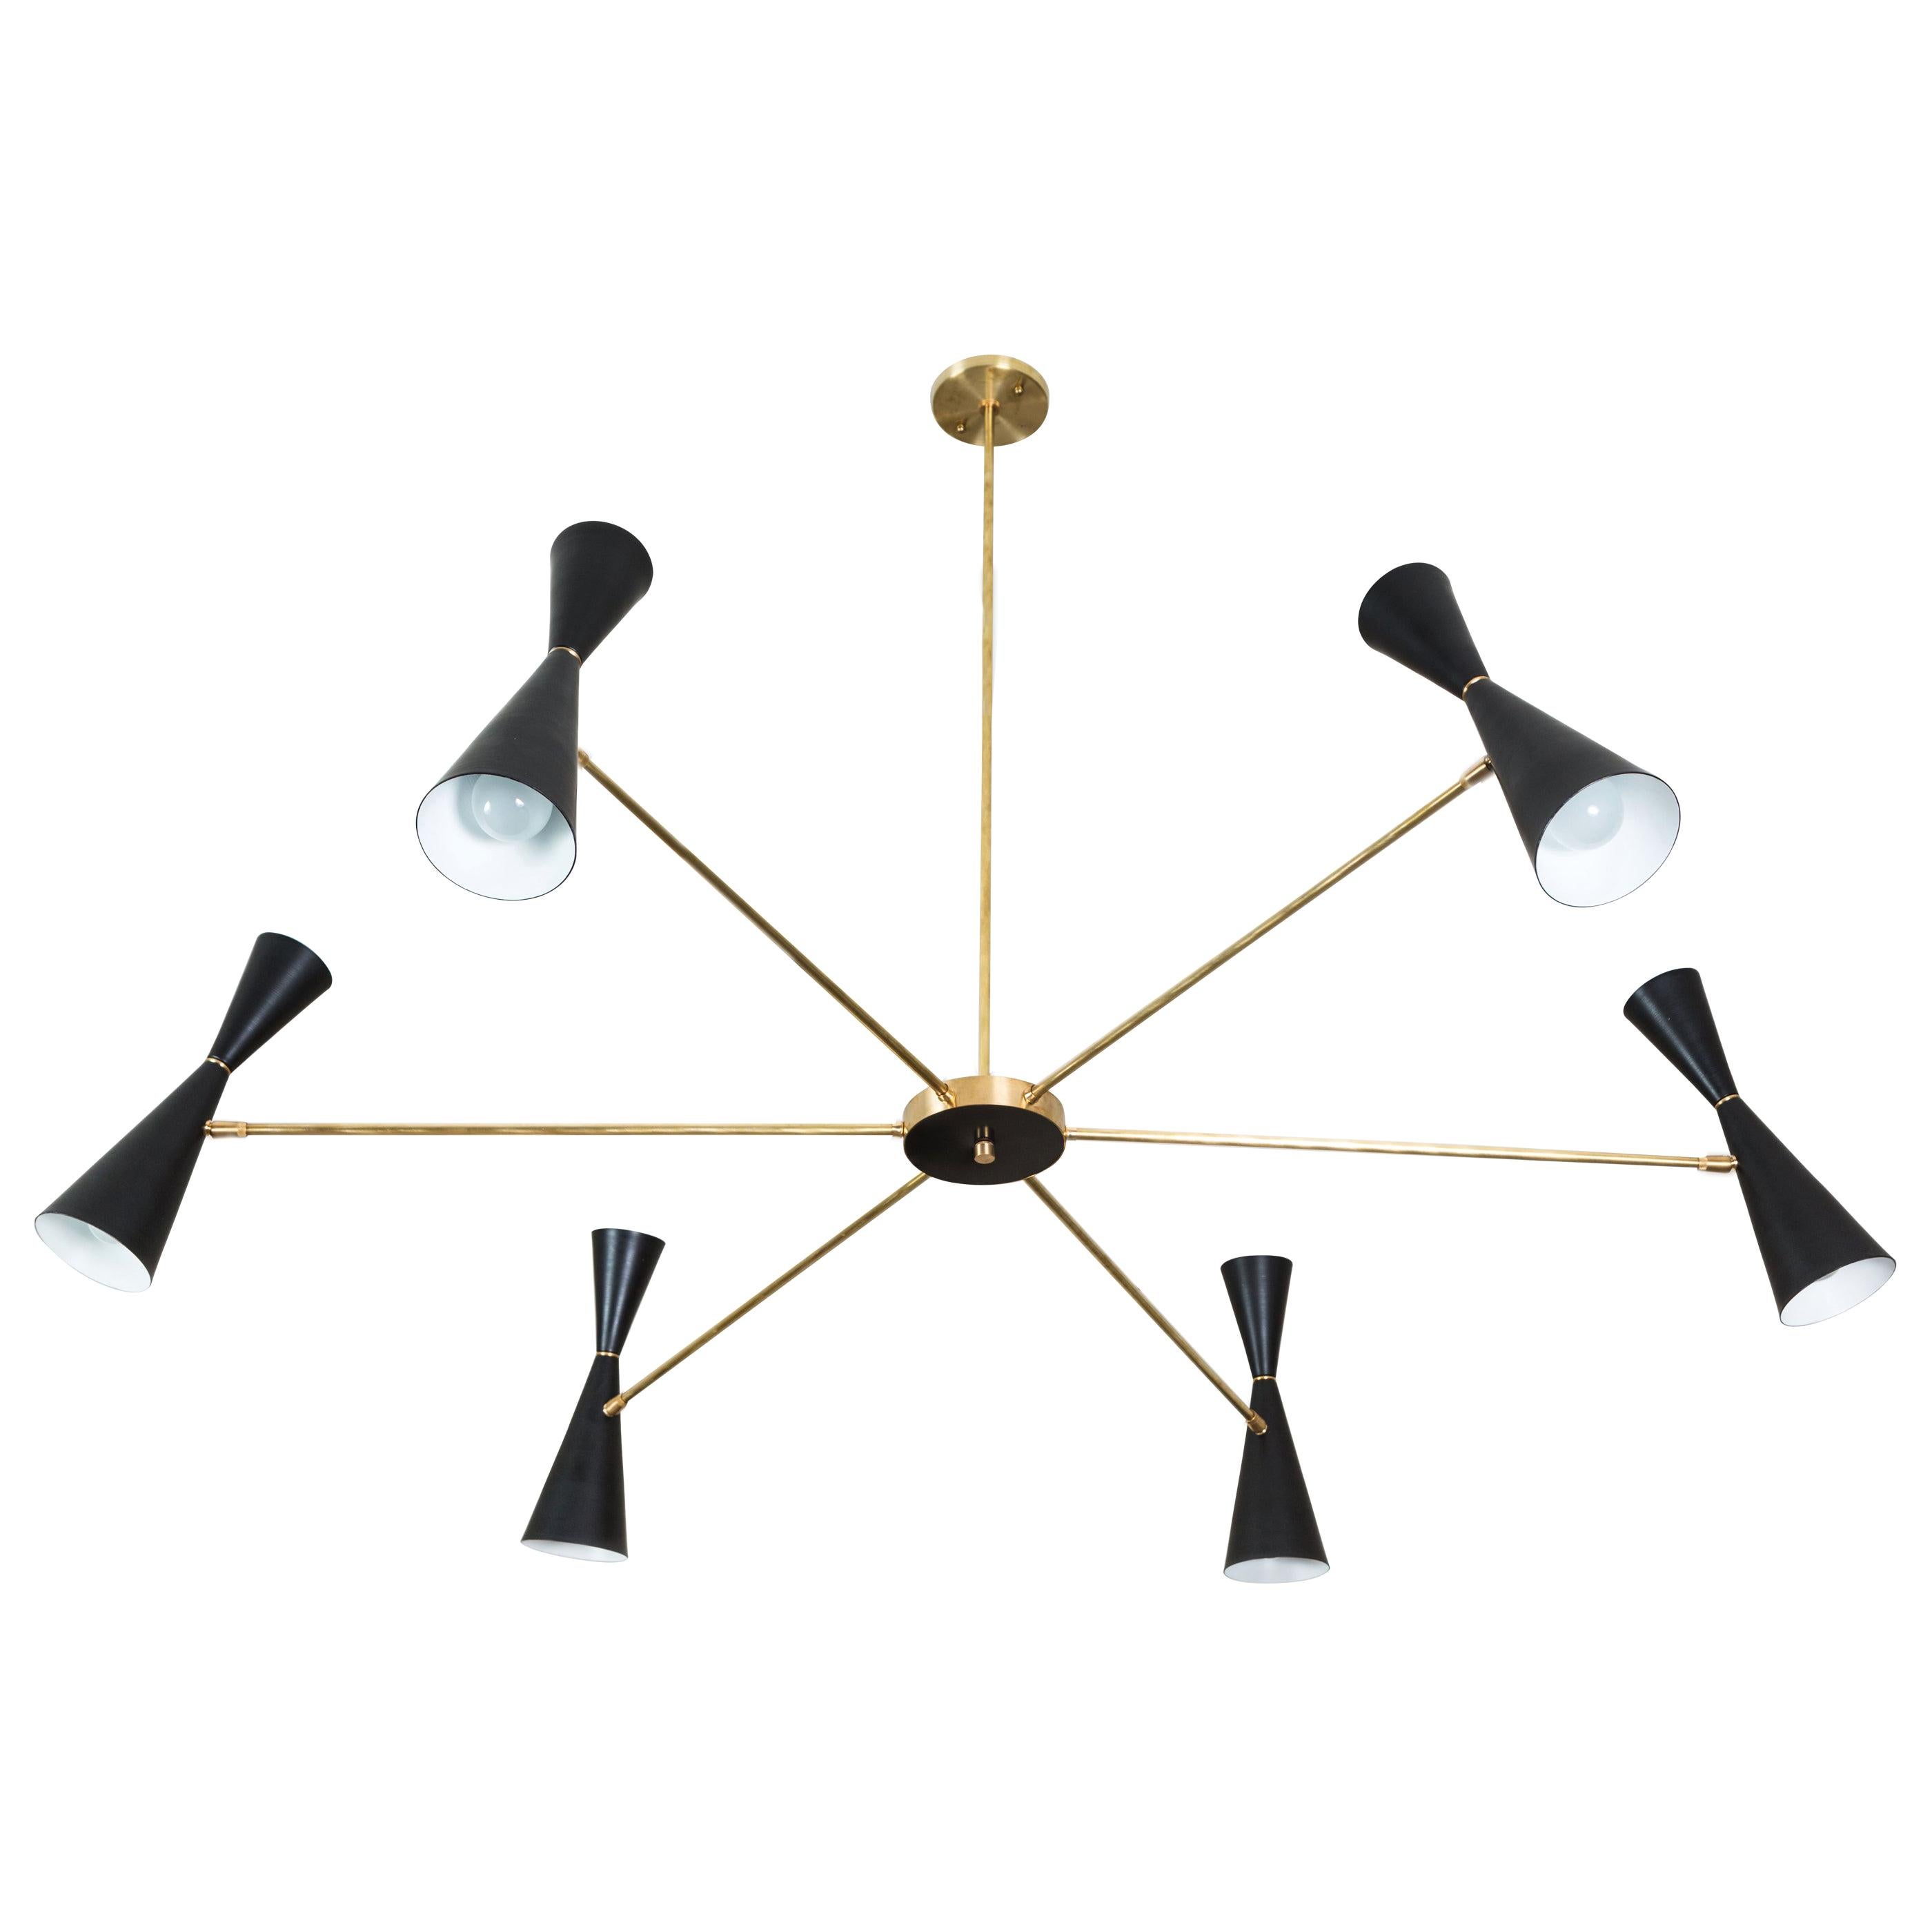 Black and Brass Radial Chandelier by Lawson-Fenning